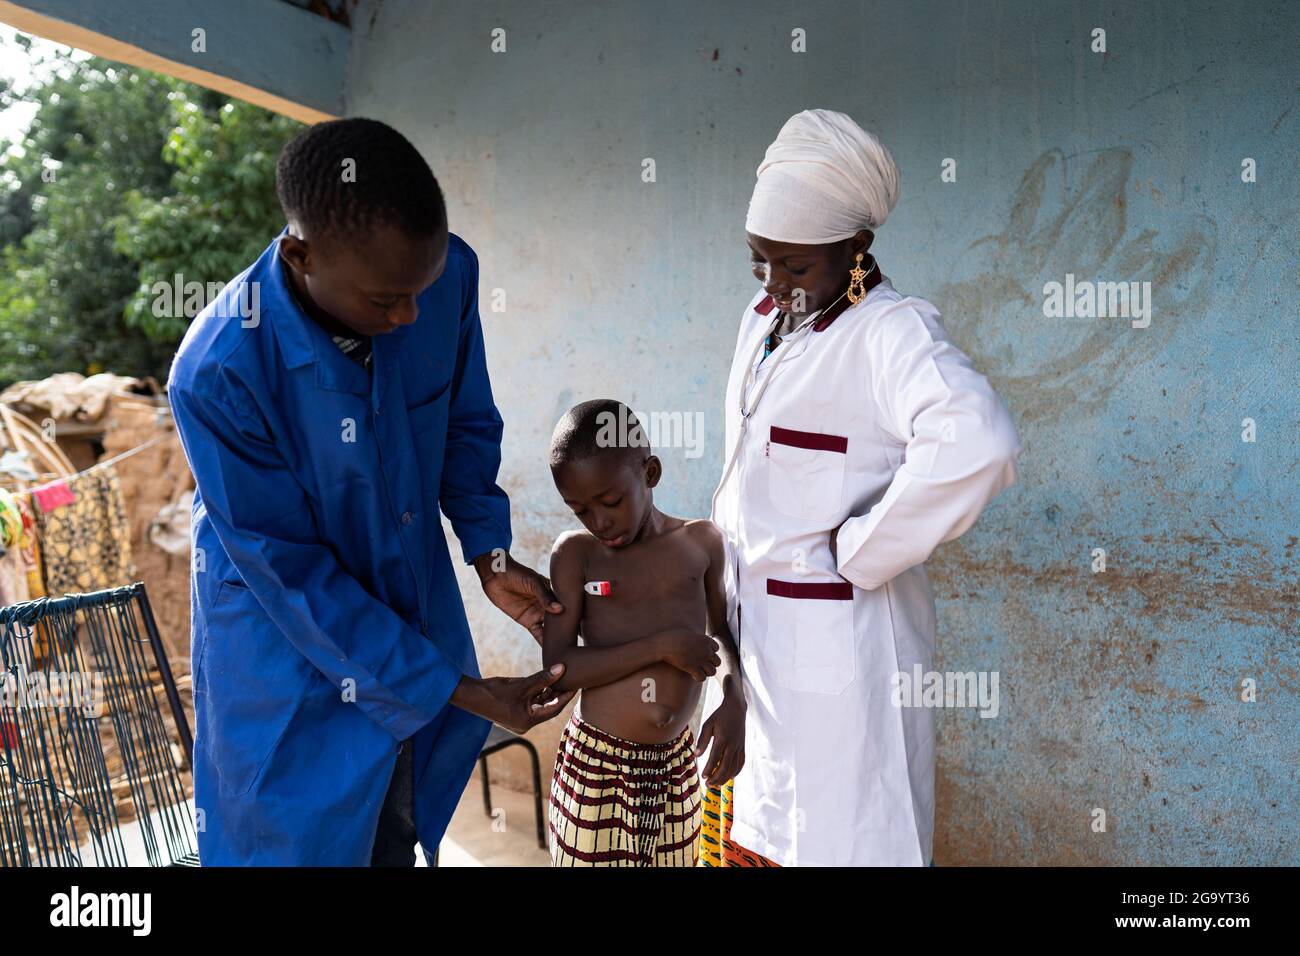 In this image, a young black medical assistenst is taking the temperature of a small toddler during a home visit, under the close supervision of a fem Stock Photo